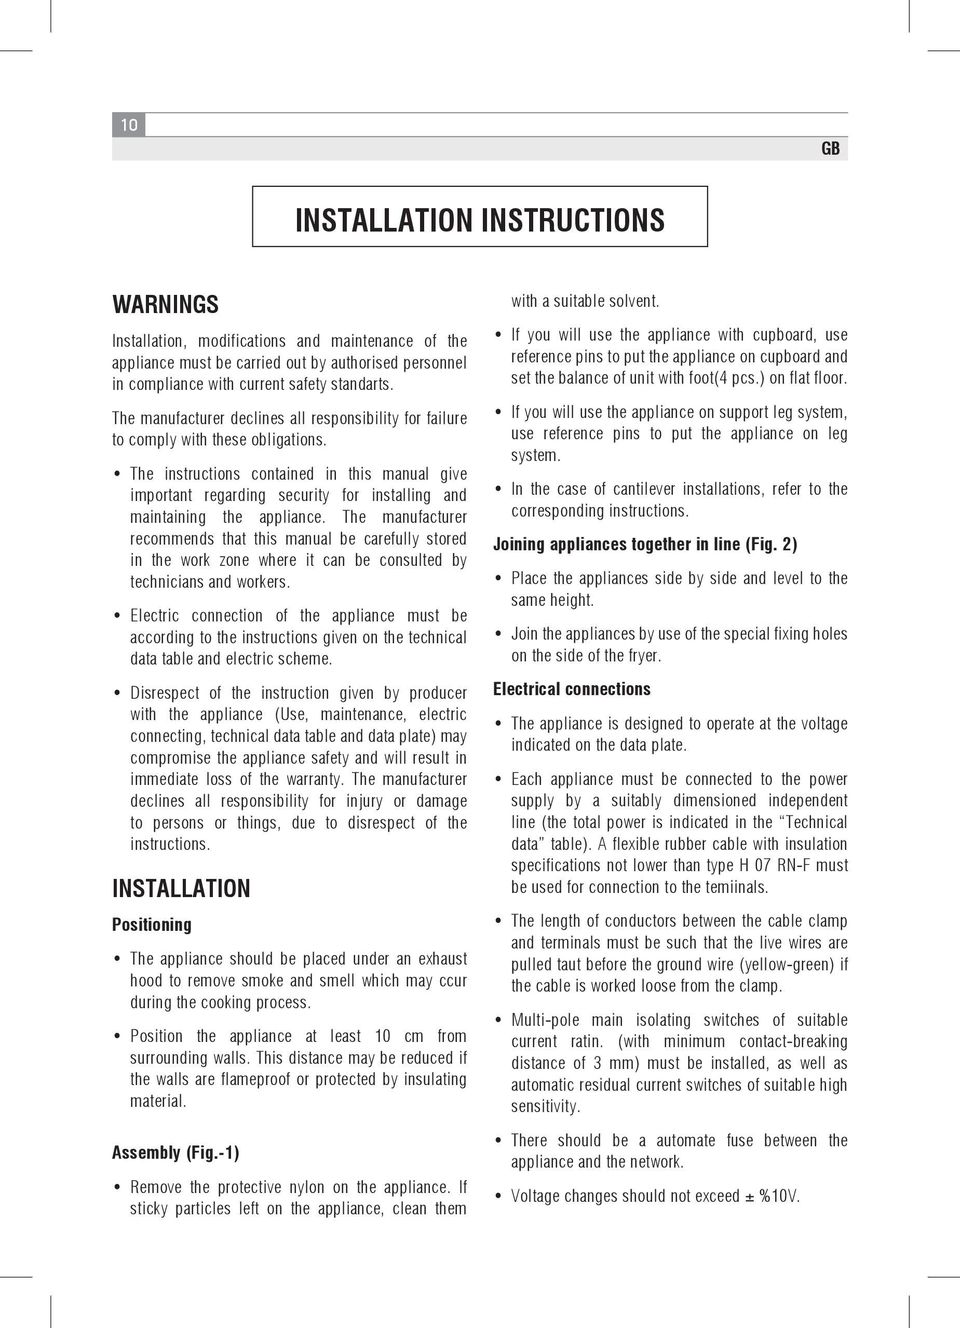 The instructions contained in this manual give important regarding security for installing and maintaining the appliance.